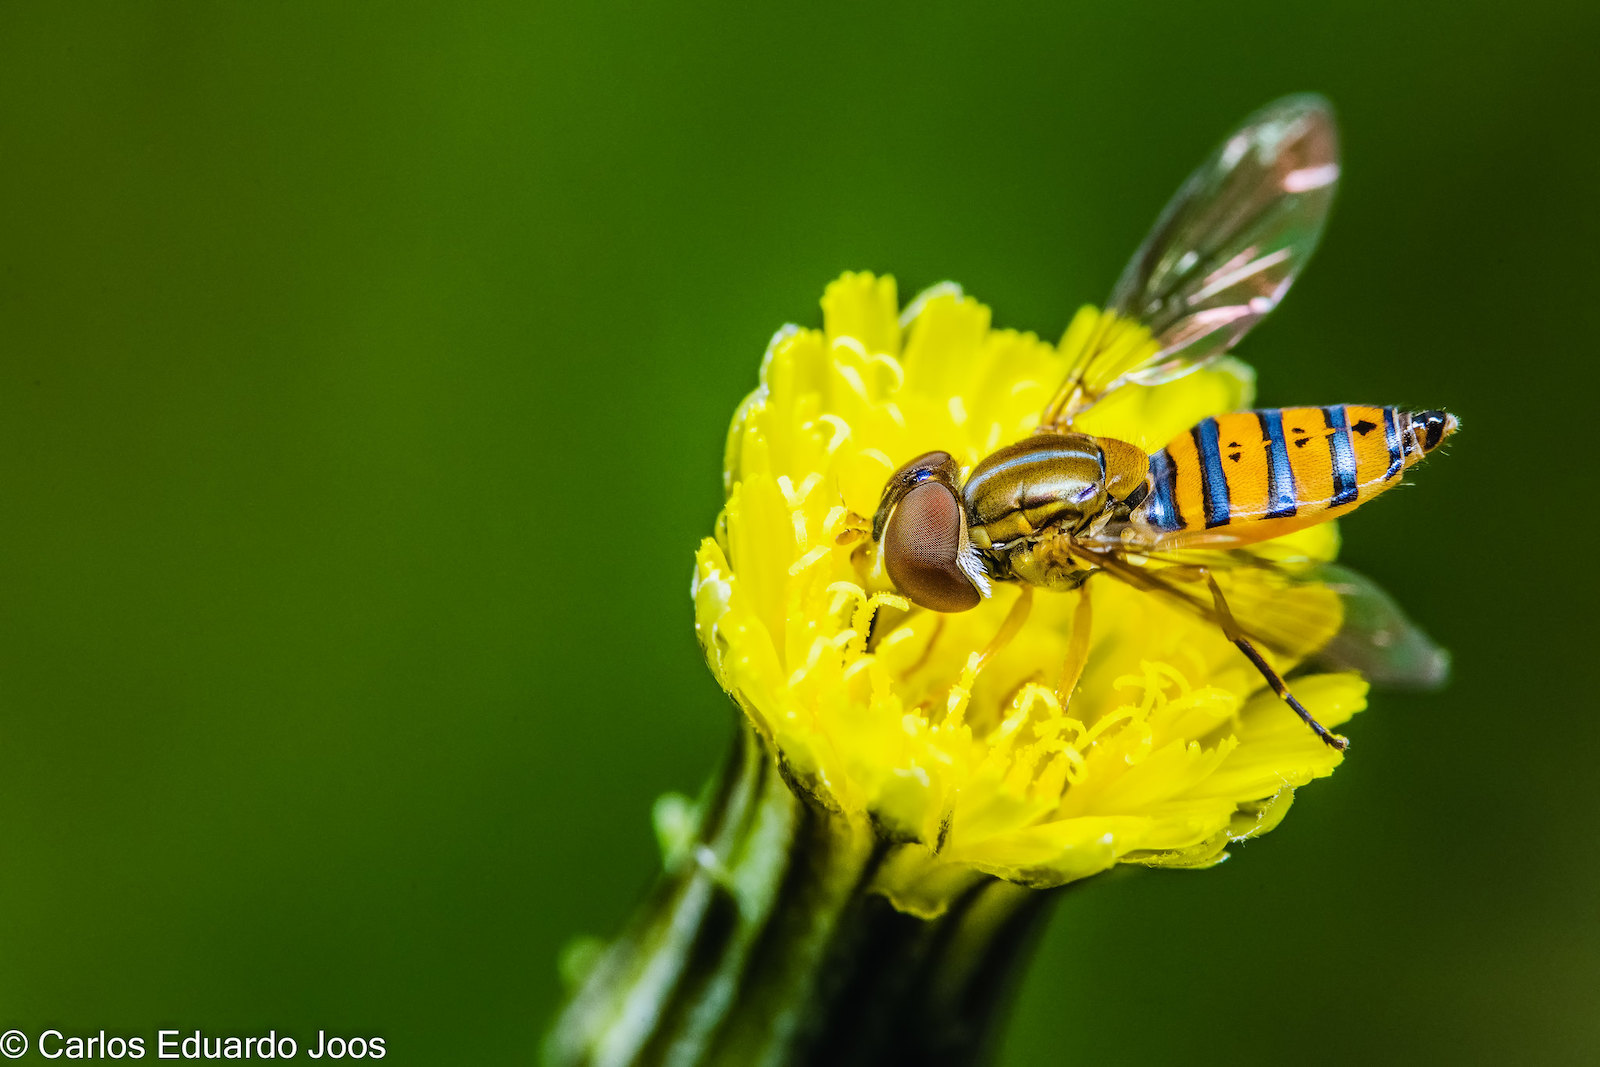  Hover flies are pollinators, and their larvae often eat aphids, preventing them from damaging crops.